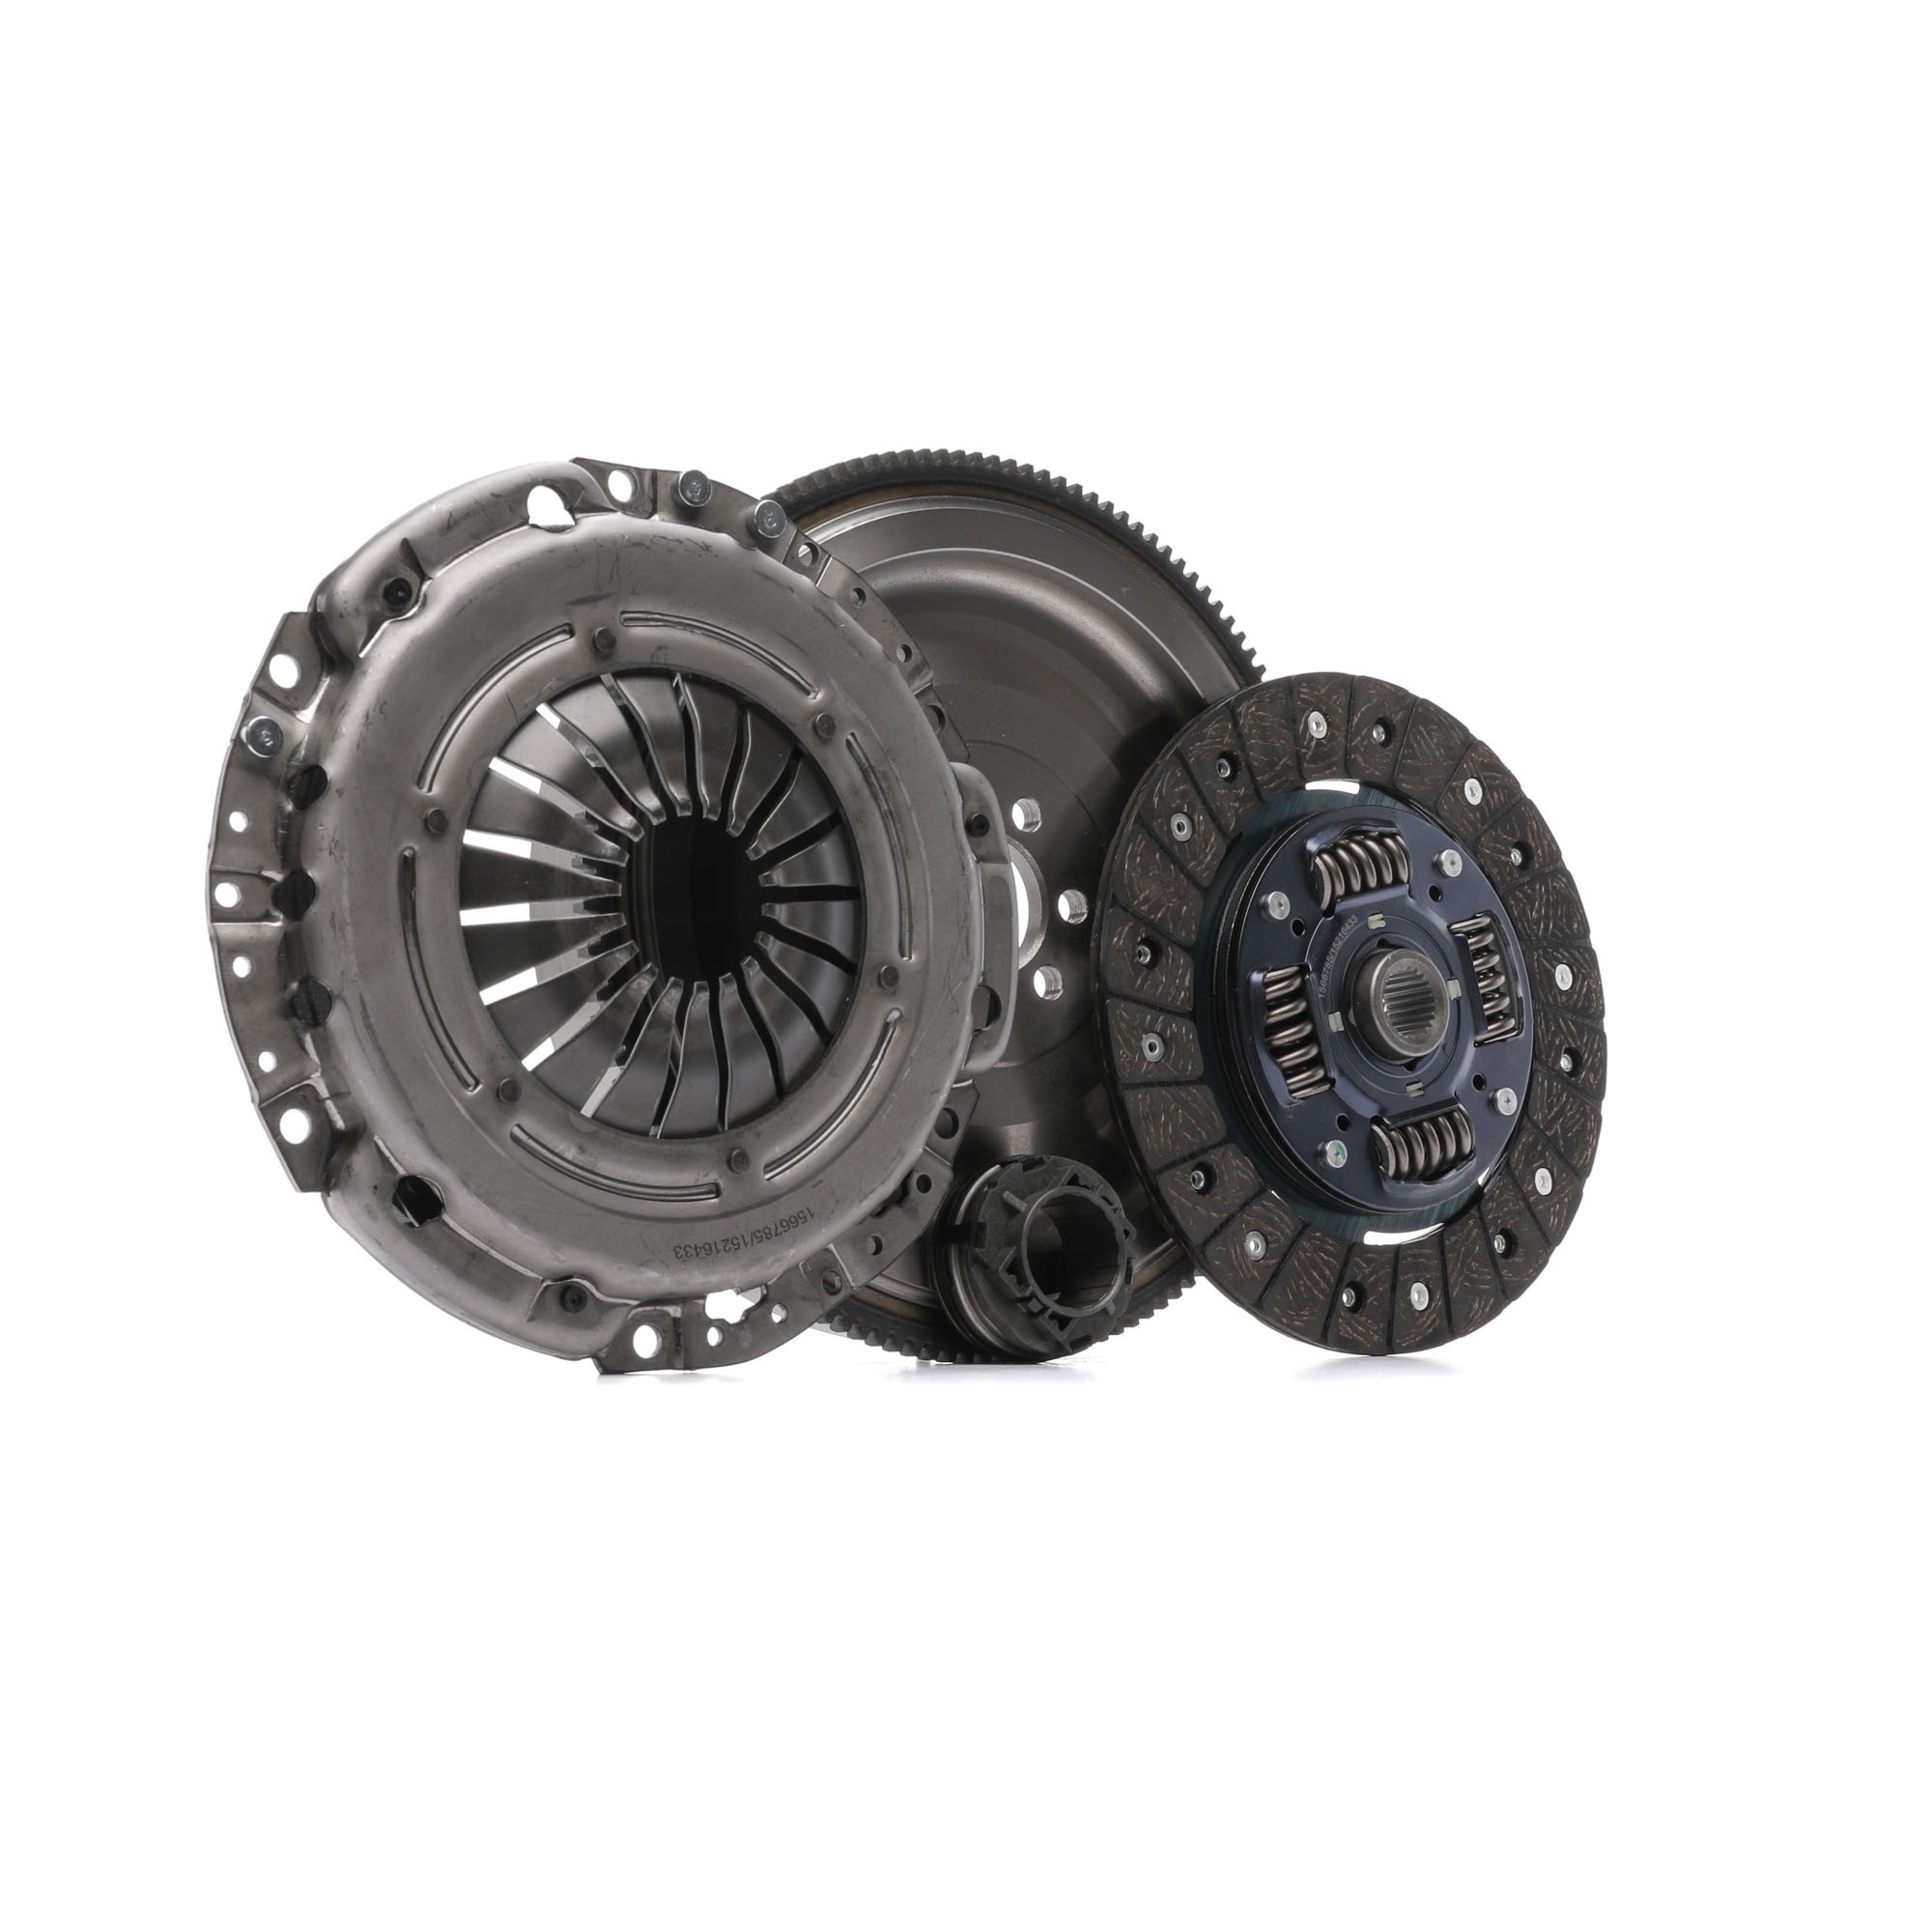 RIDEX 479C0321 Clutch kit with clutch pressure plate, with flywheel, with screw set, with clutch disc, with clutch release bearing, Special tools for mounting not necessary, 228mm